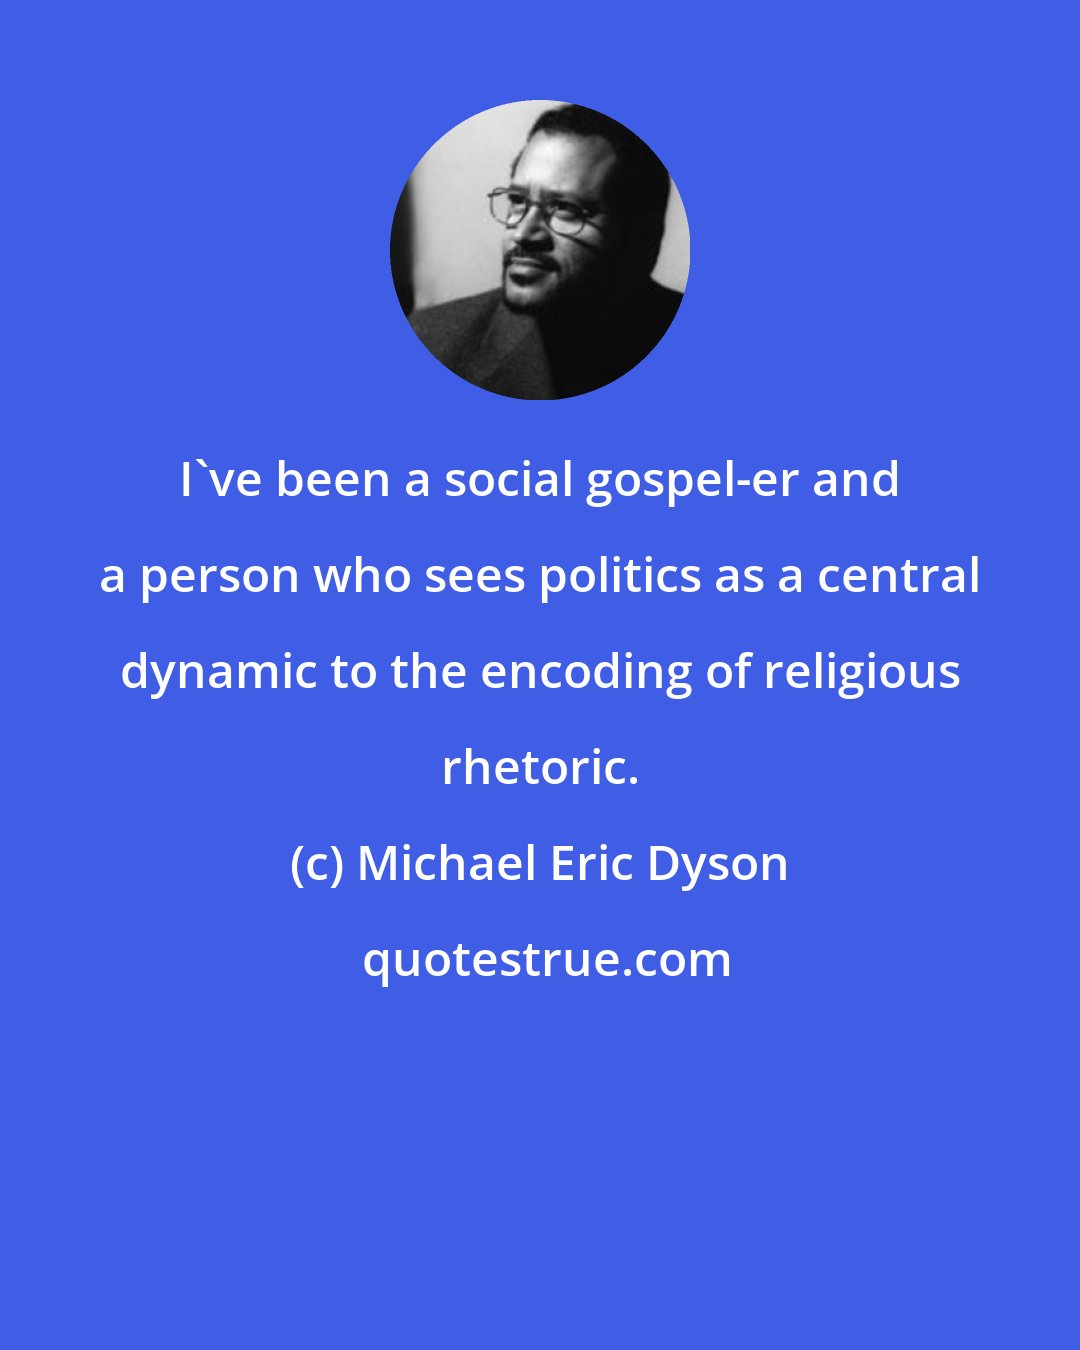 Michael Eric Dyson: I've been a social gospel-er and a person who sees politics as a central dynamic to the encoding of religious rhetoric.